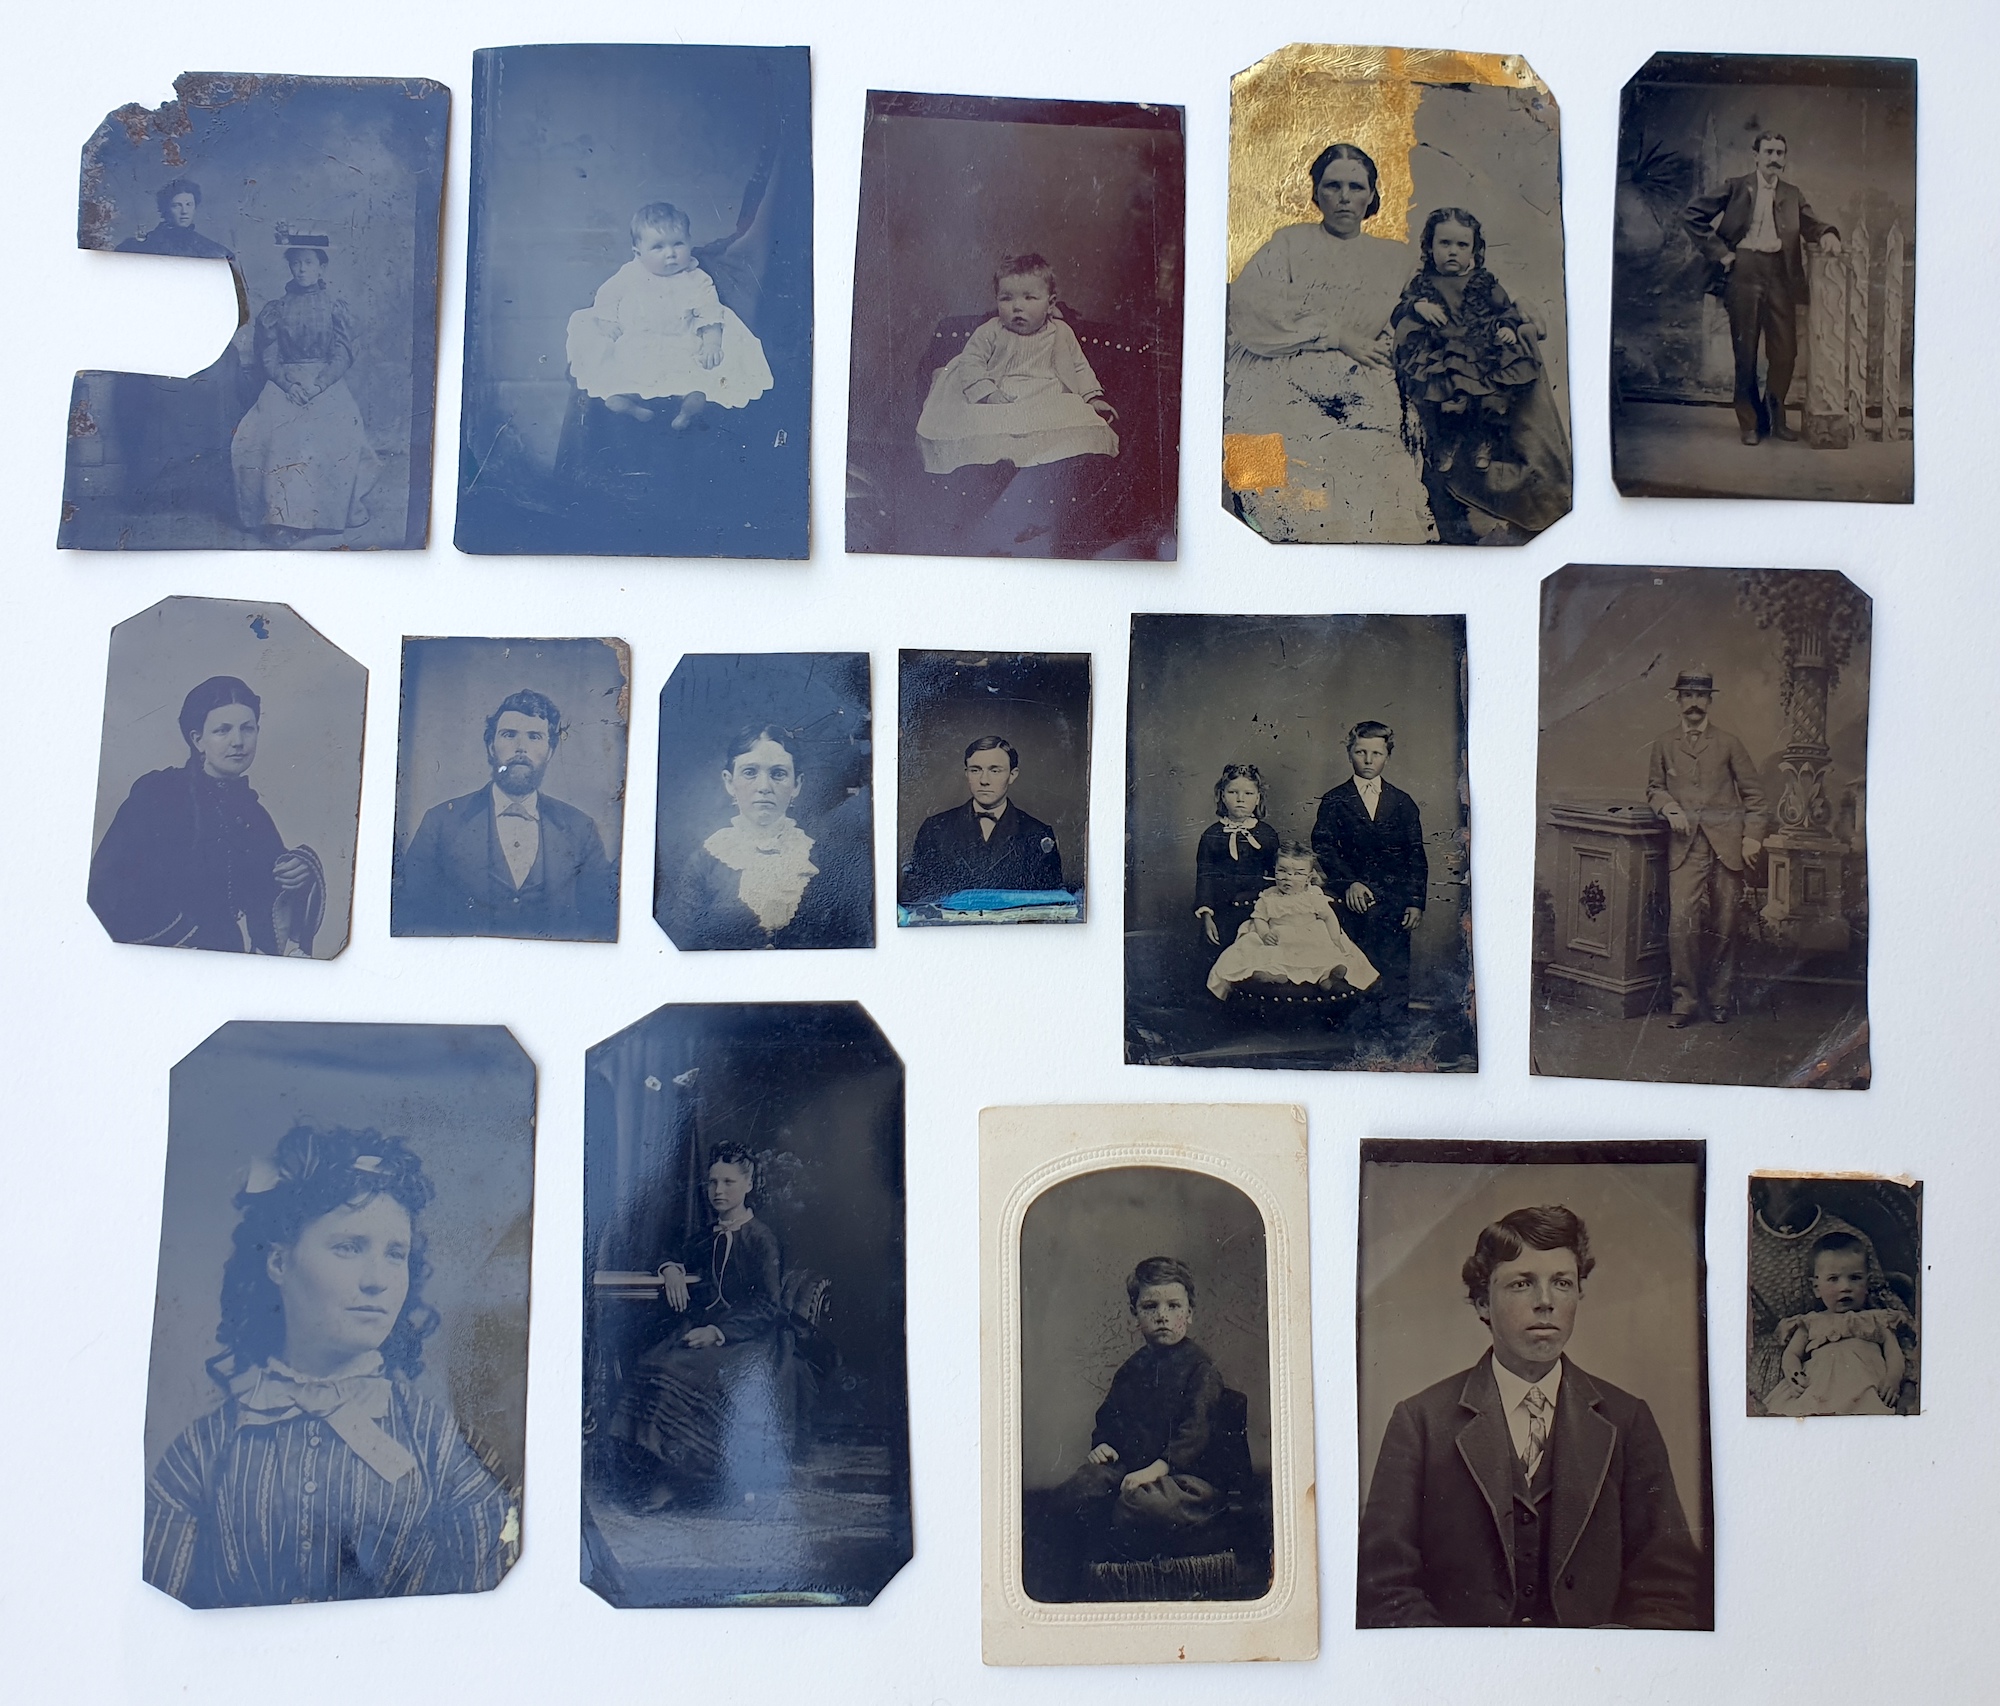 Some of my tintype collection